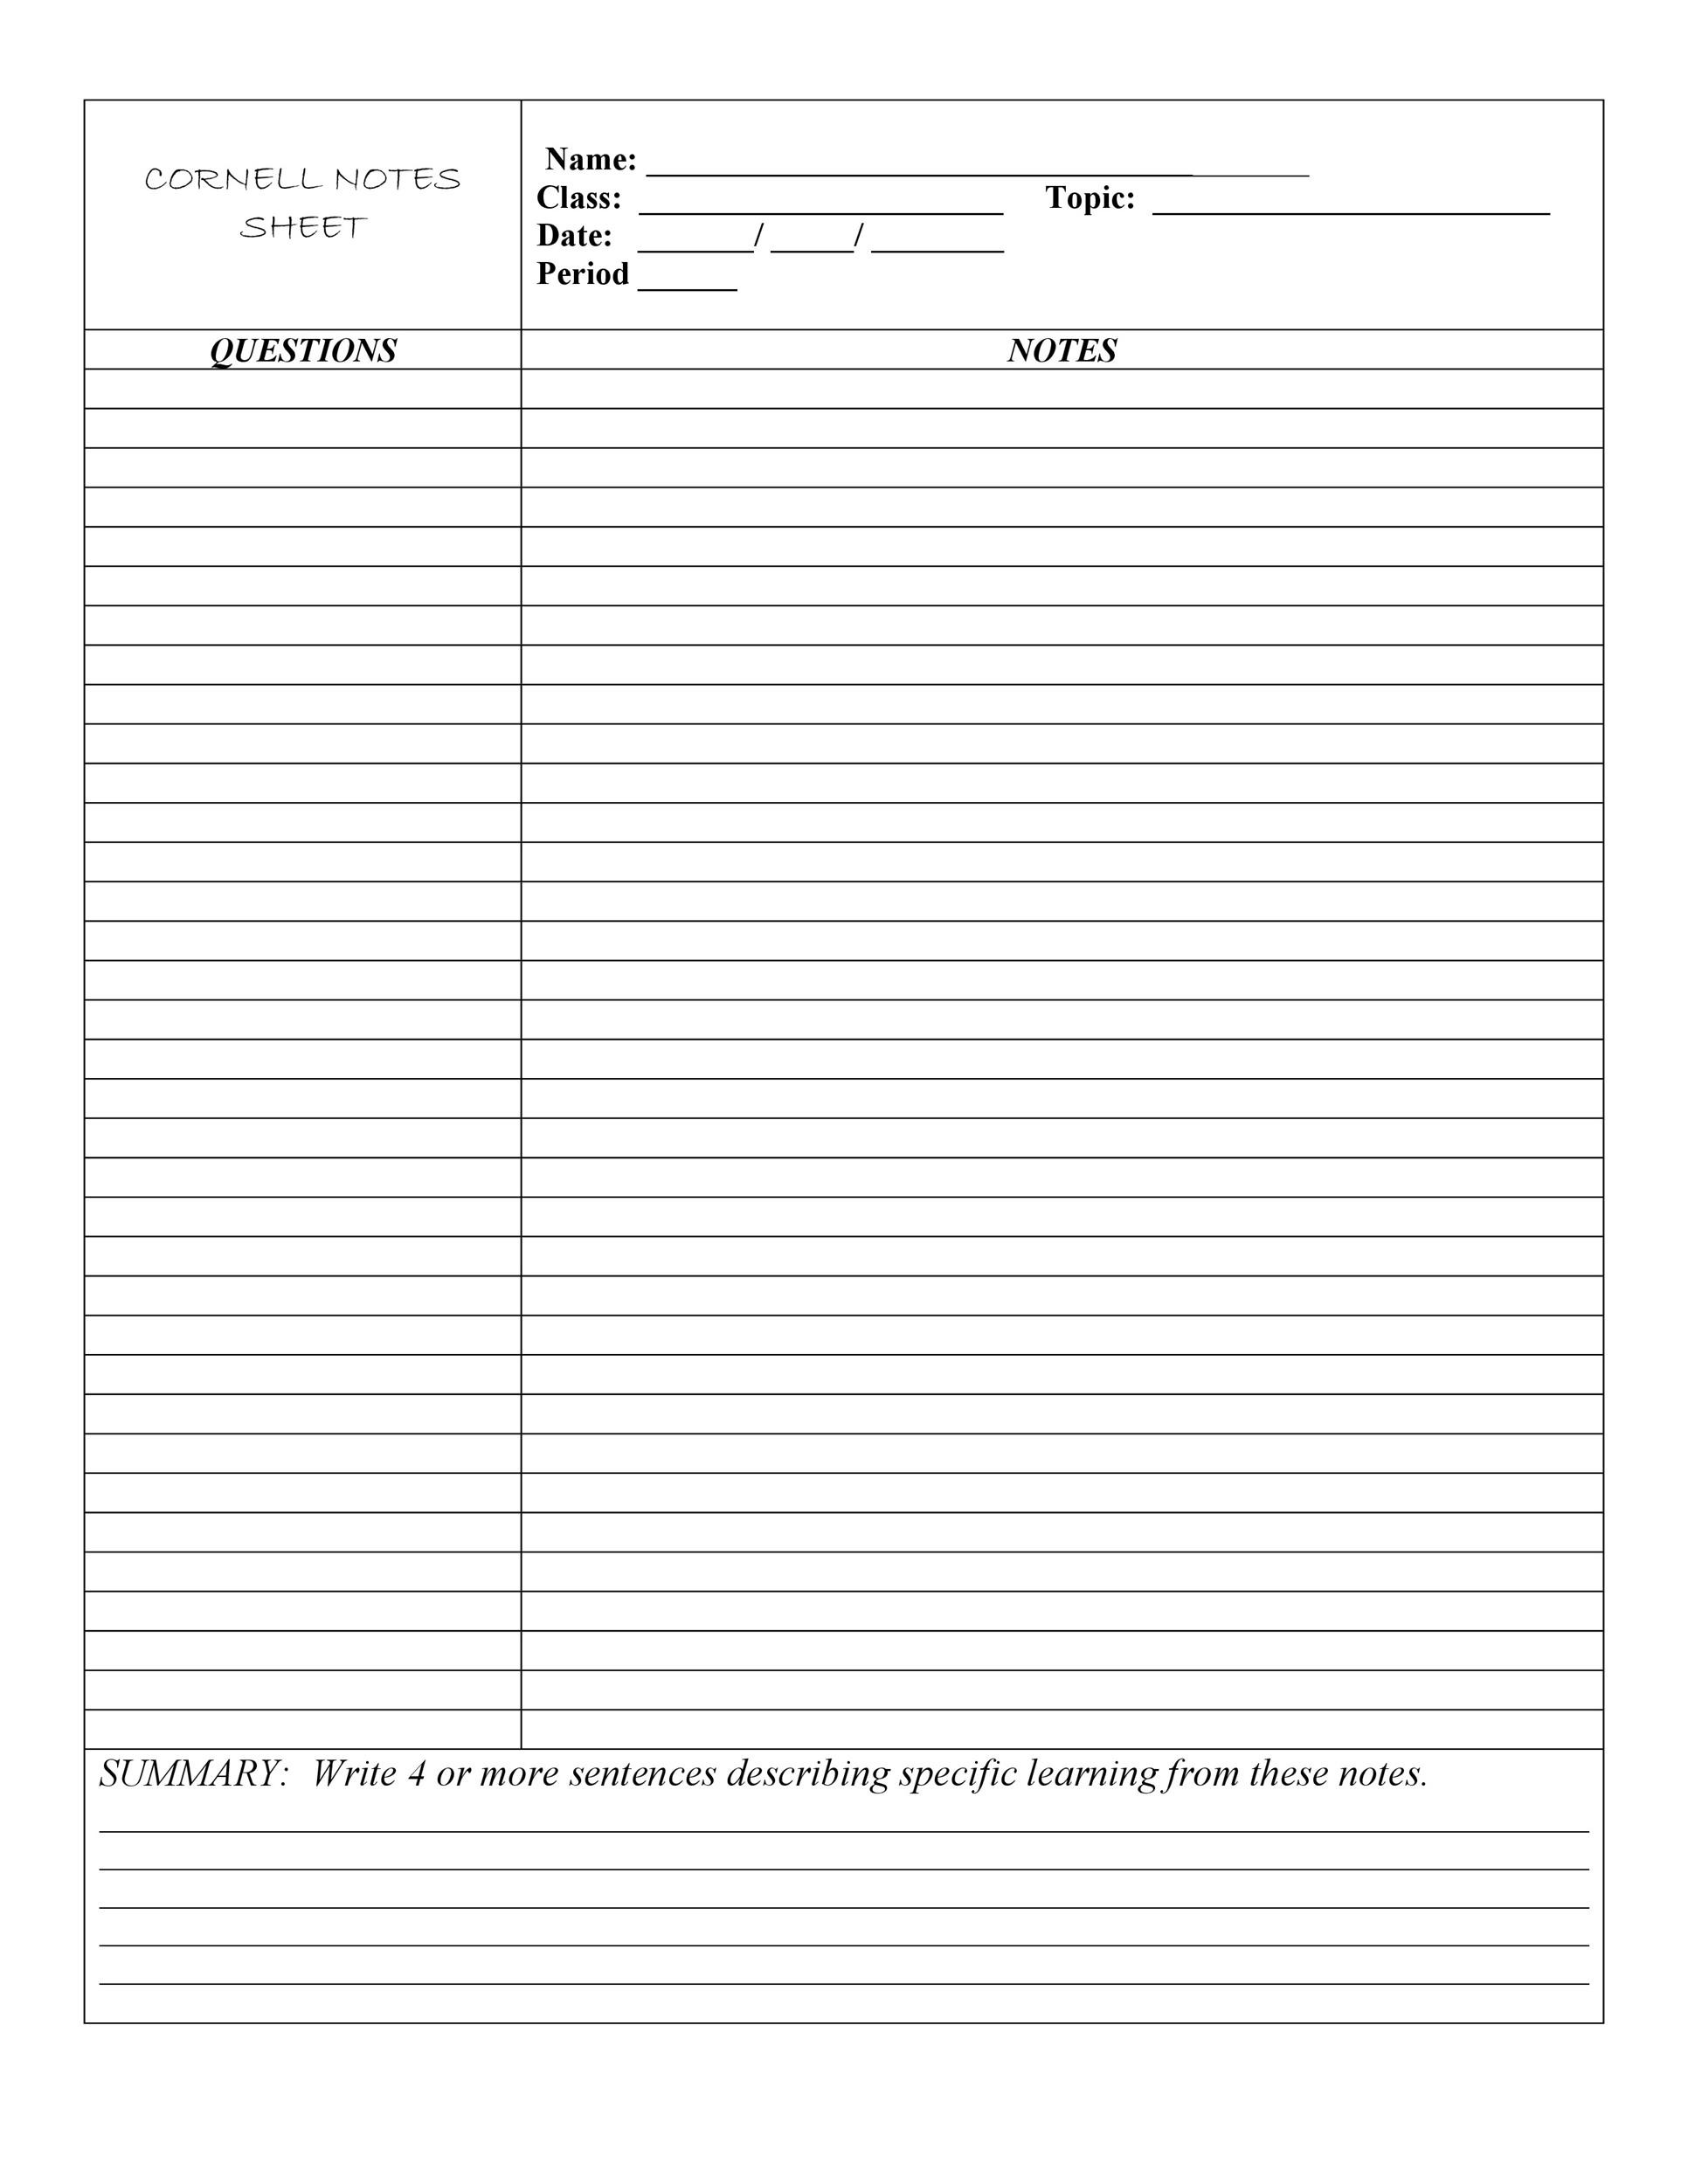 Free Cornell Notes Template 01